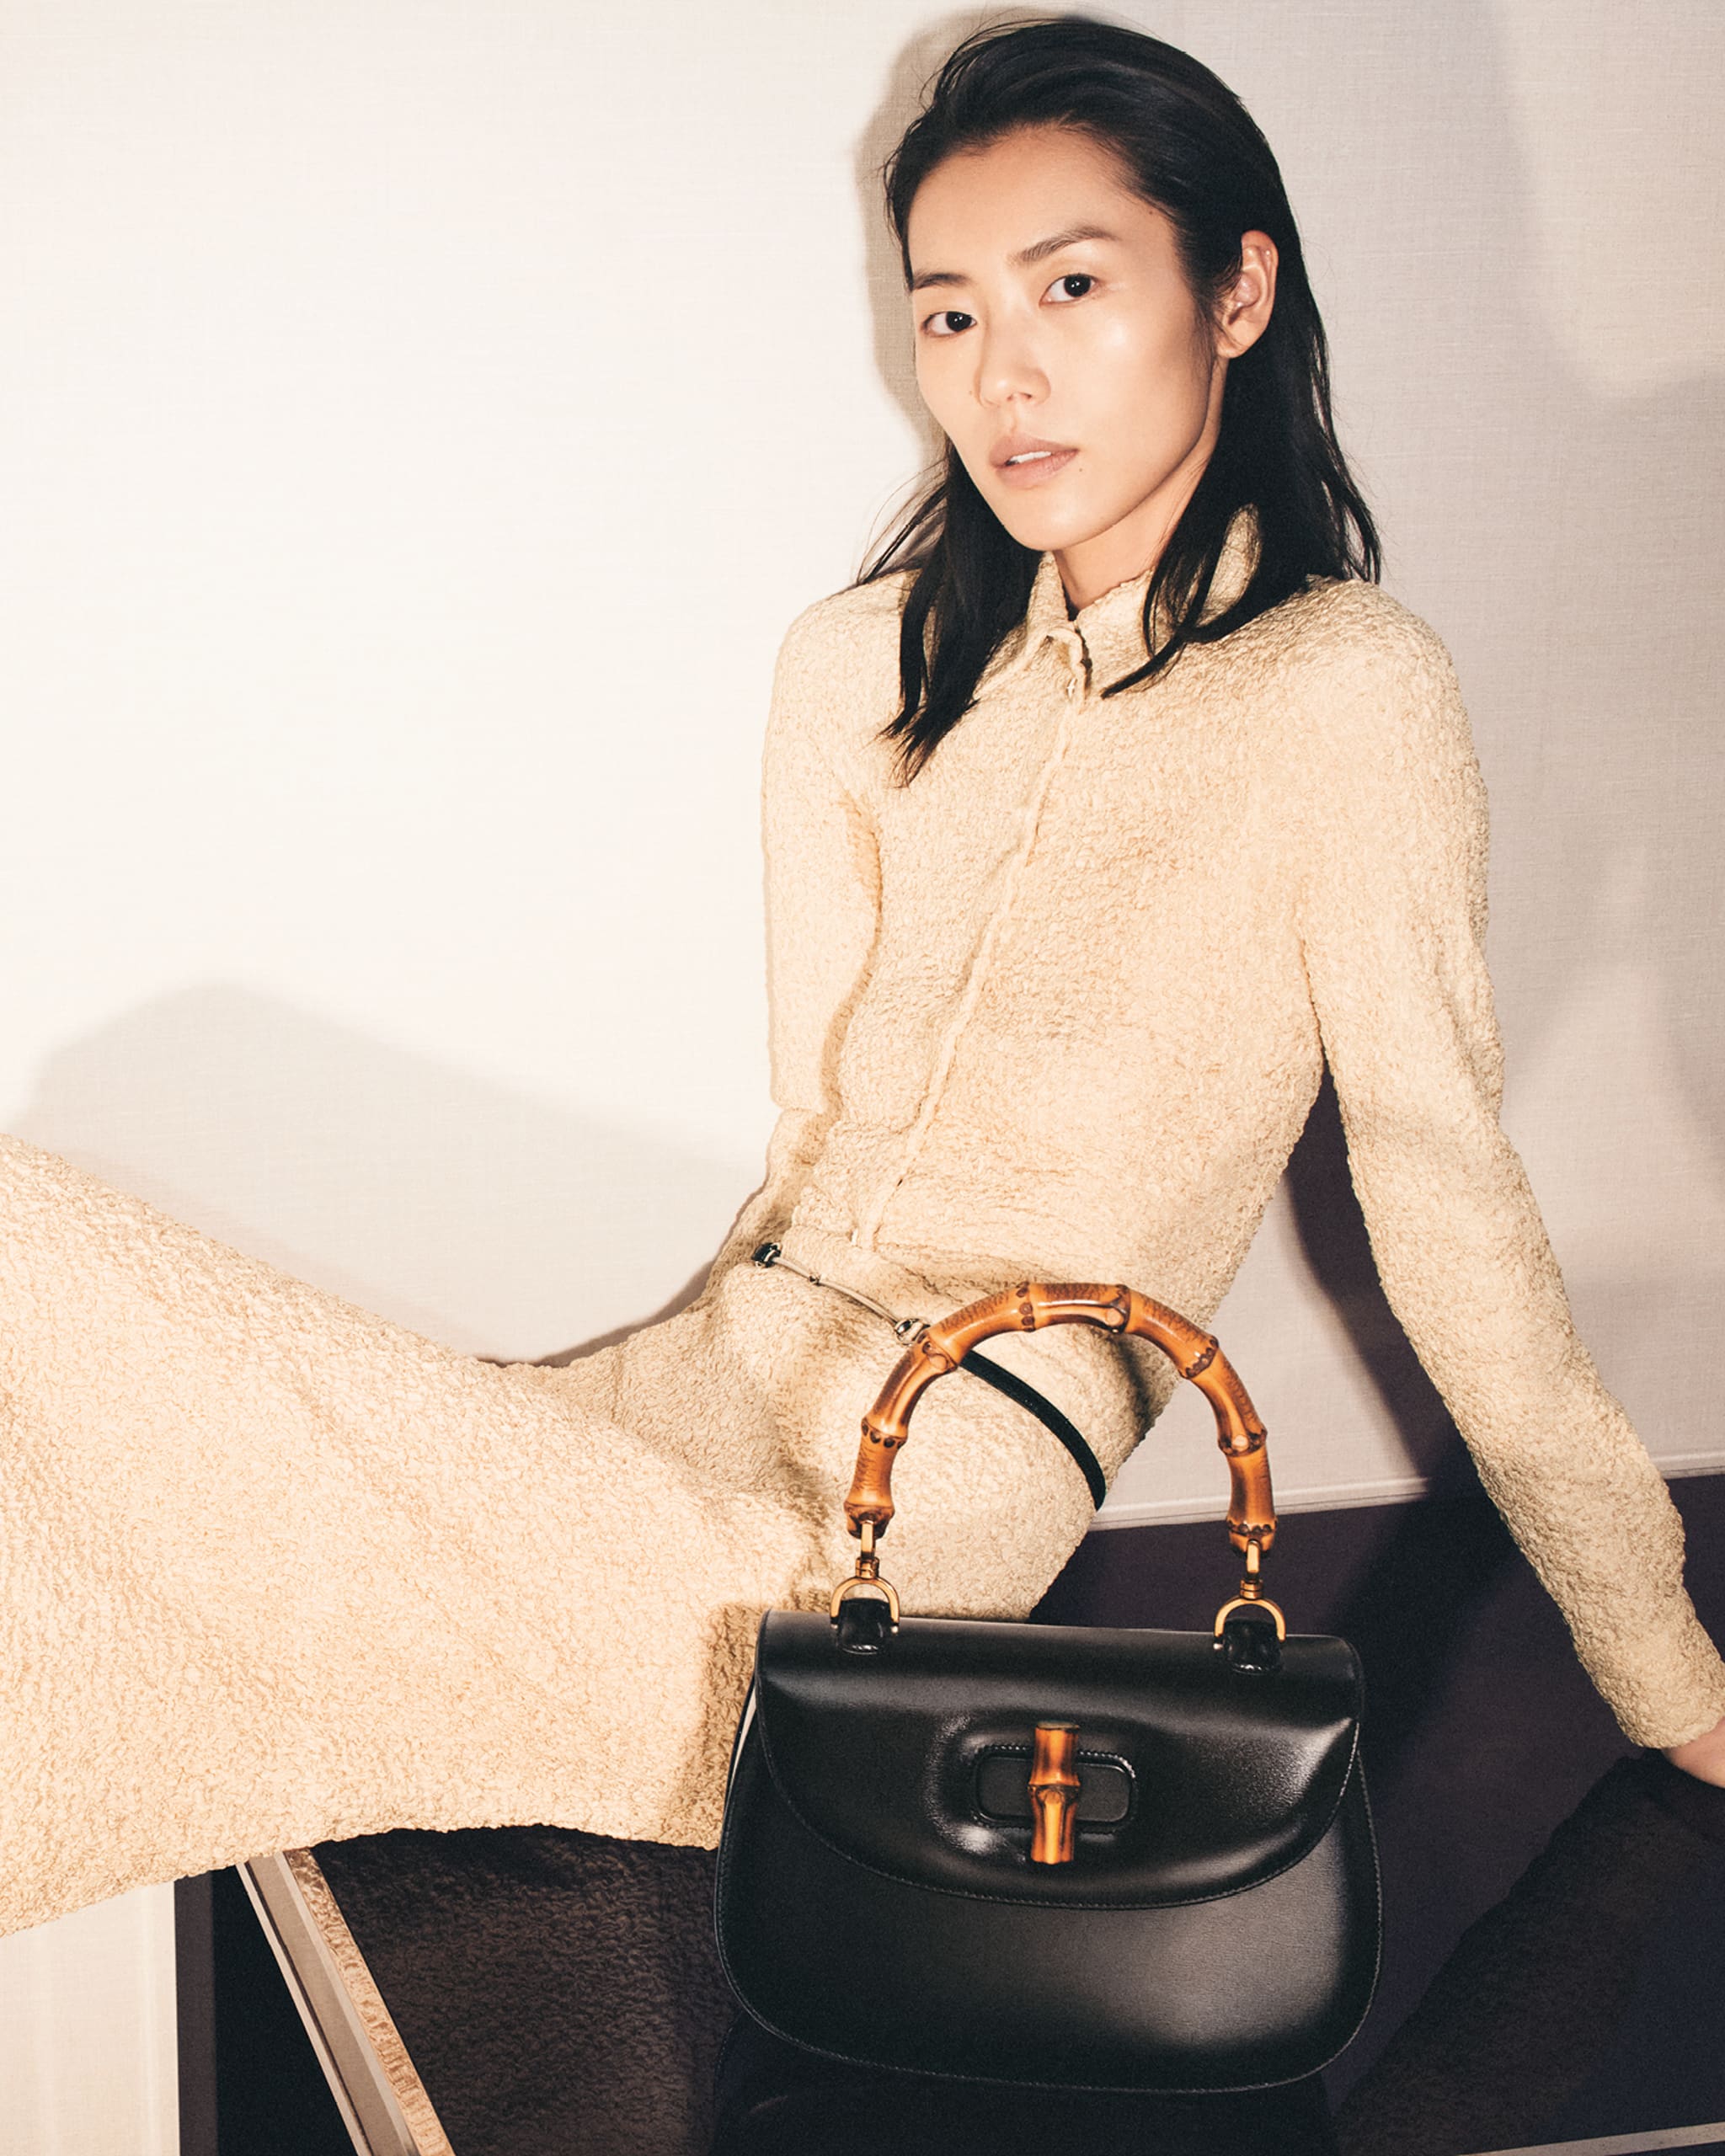 Gucci Latest Bamboo 1947 Campaign Featuring Liu Wen by David Sims